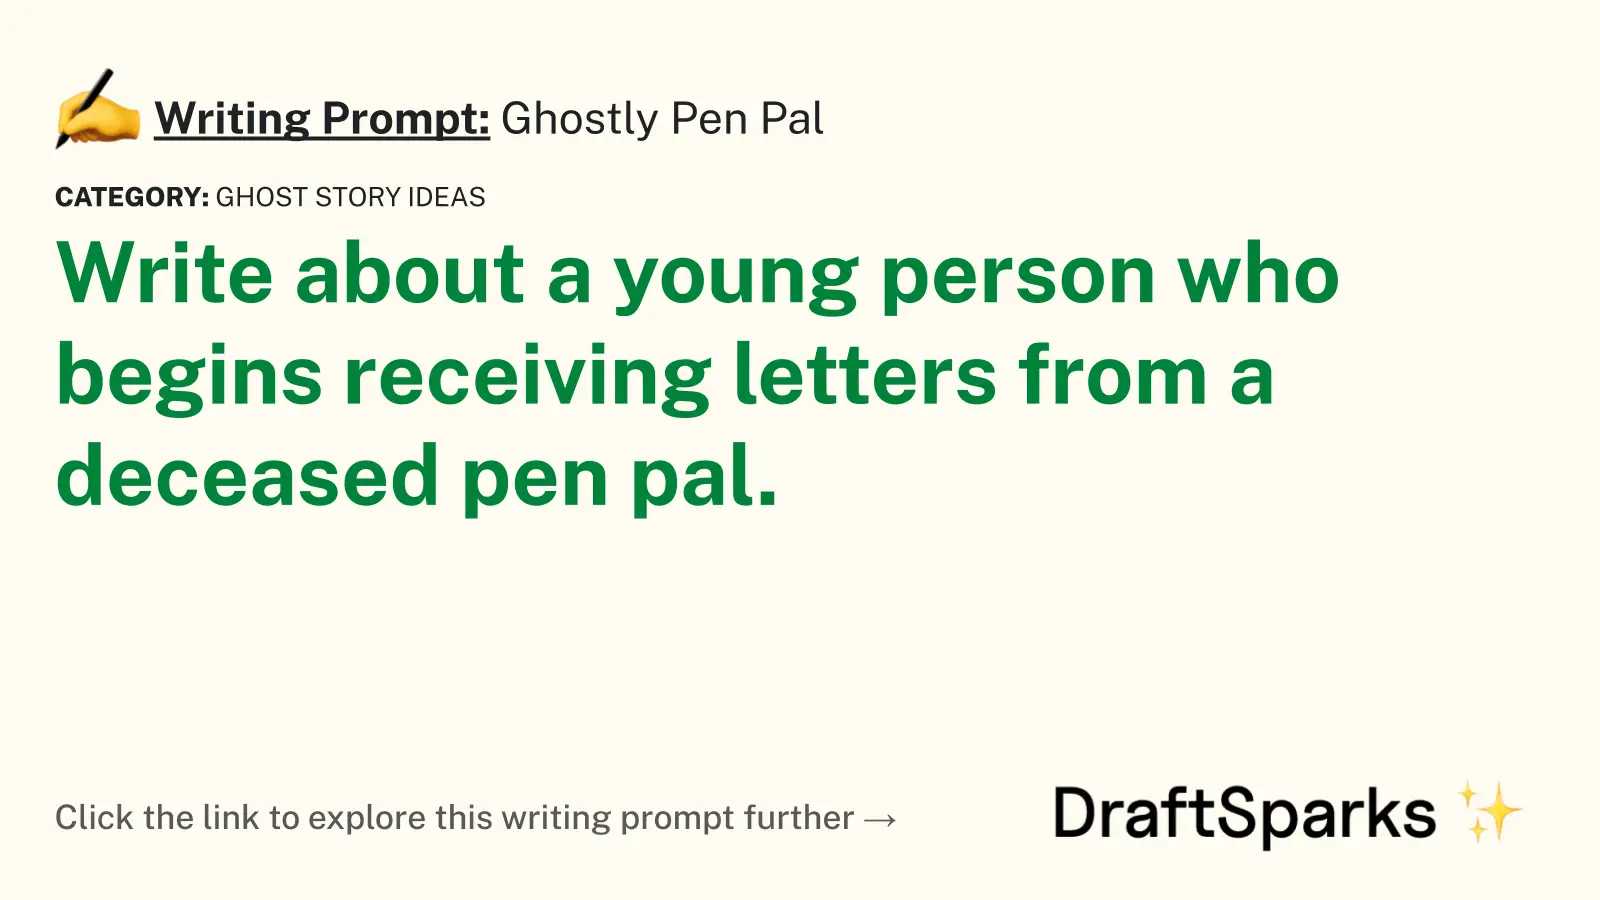 Ghostly Pen Pal